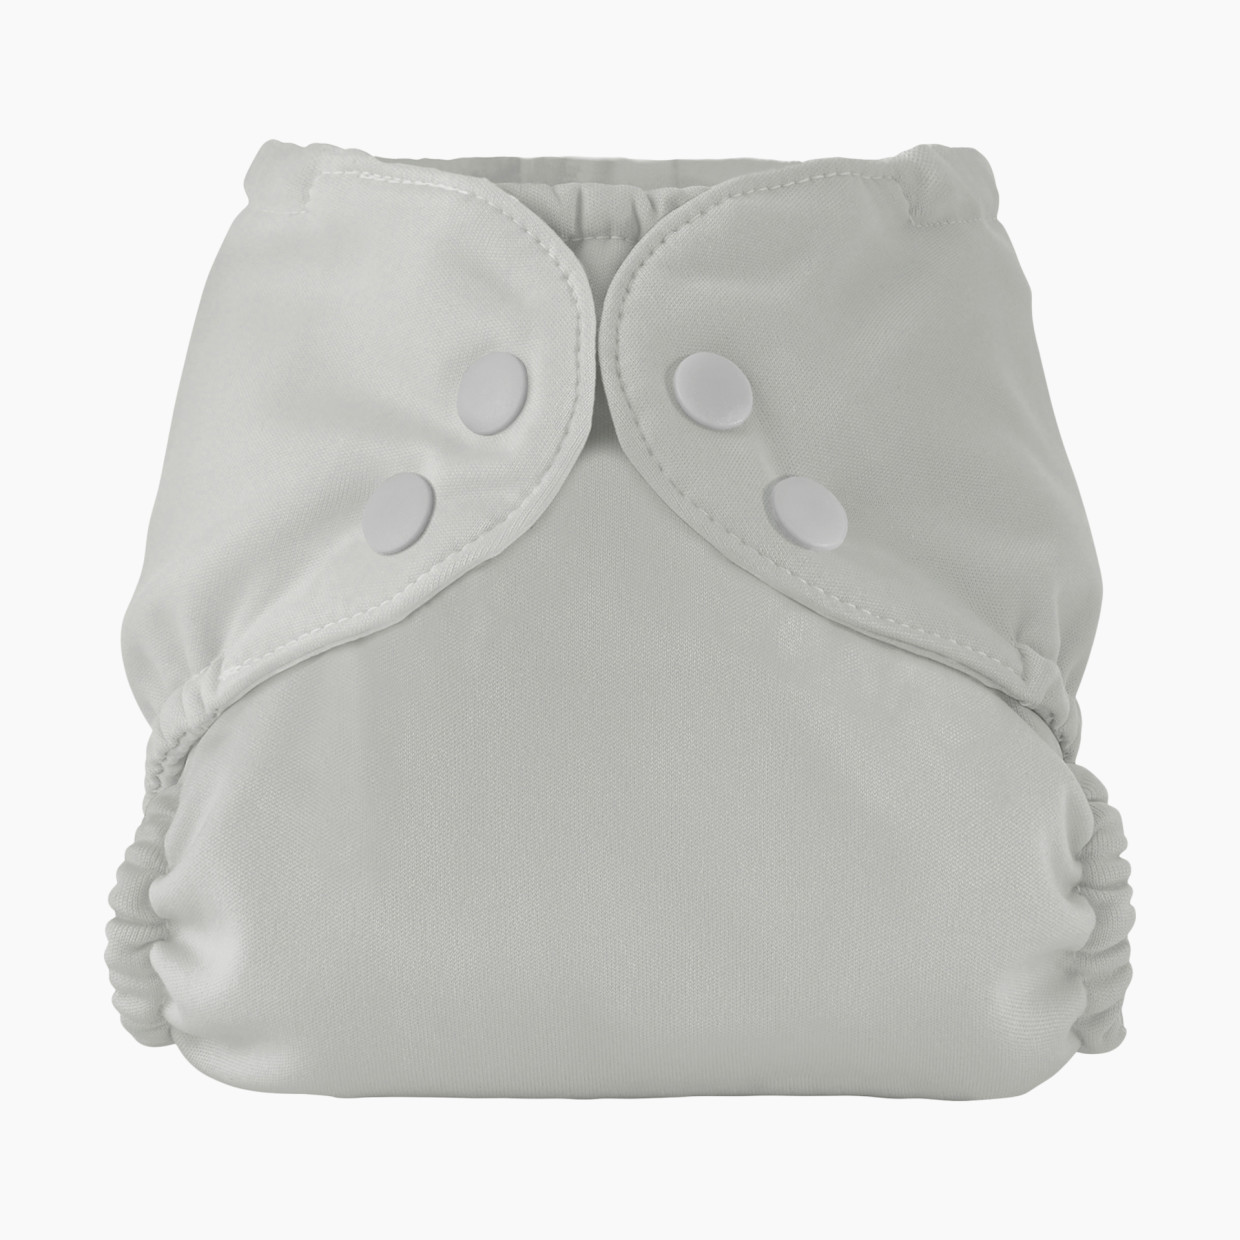 Esembly Recycled Diaper Cover (Outer) + Swim Diaper - Dove, Size 2 (18-35 Lbs).